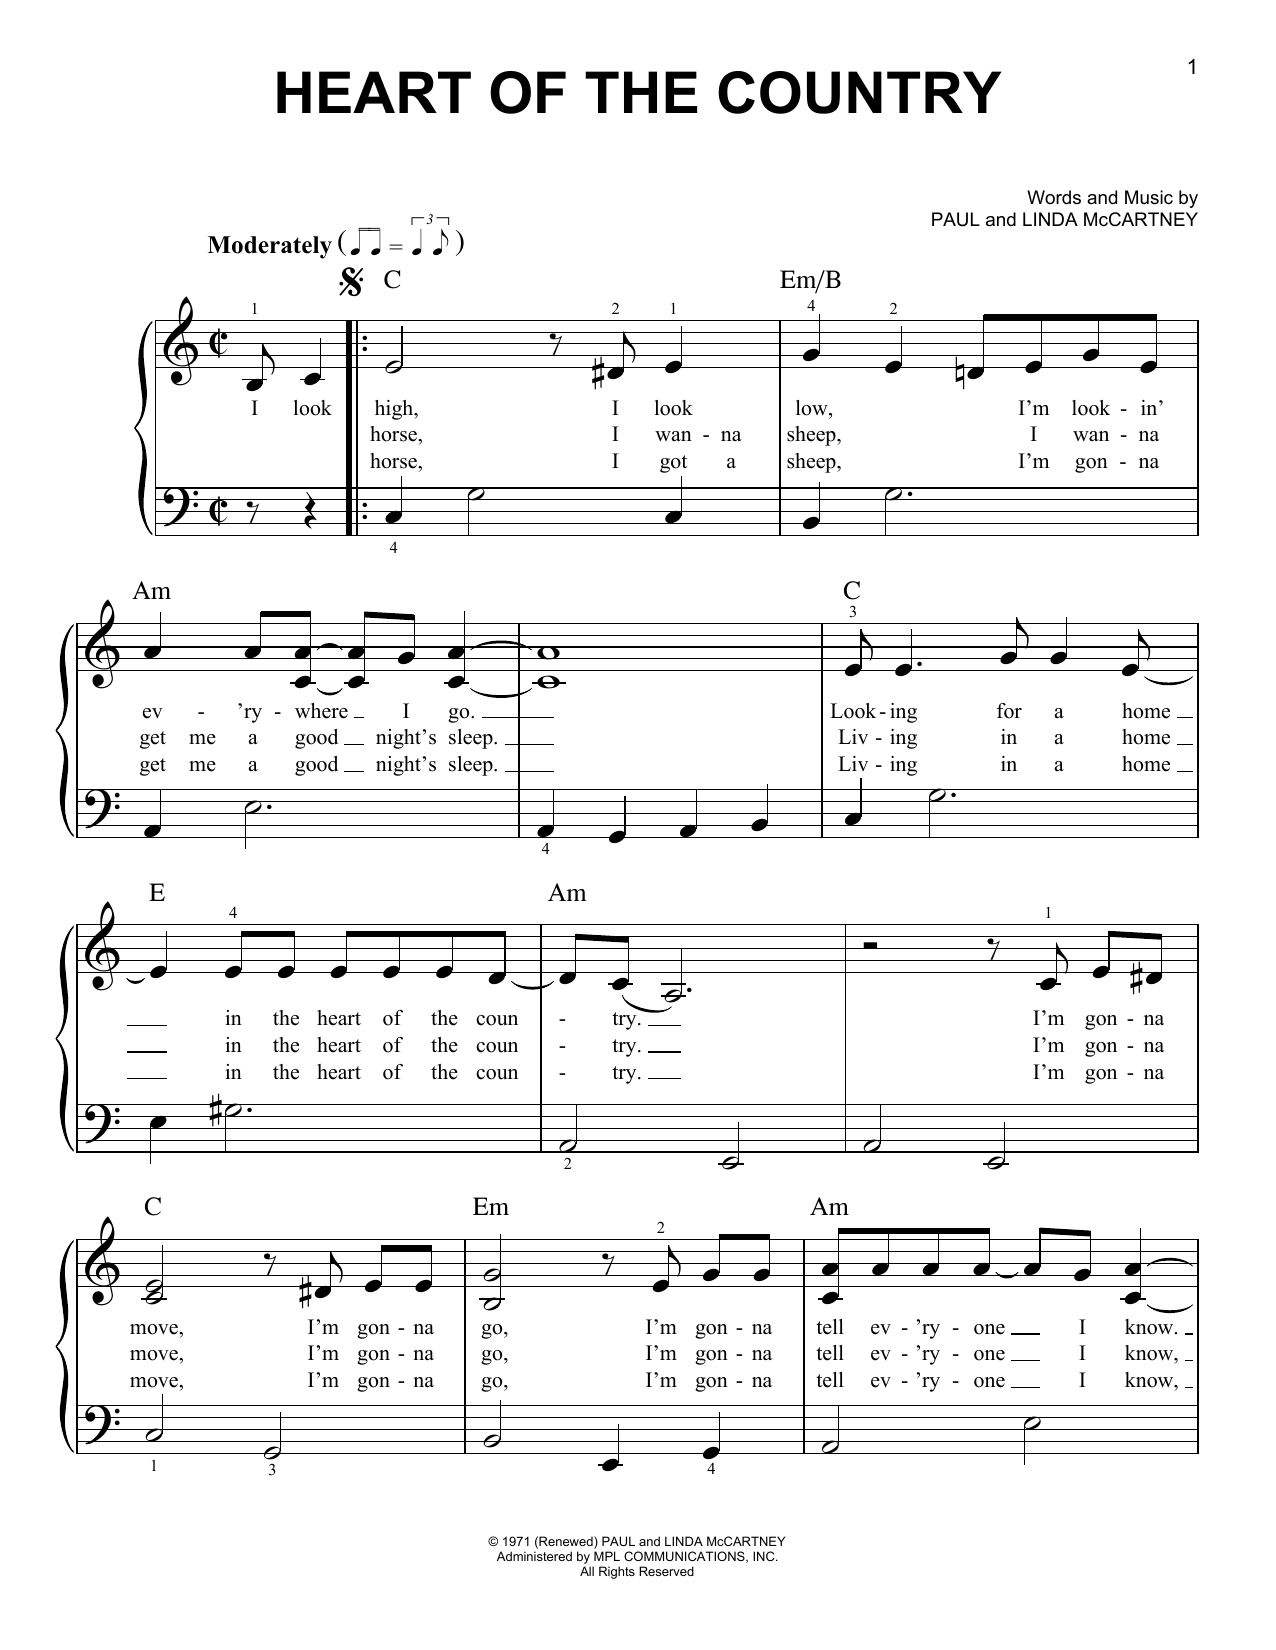 Download Paul McCartney Heart Of The Country Sheet Music